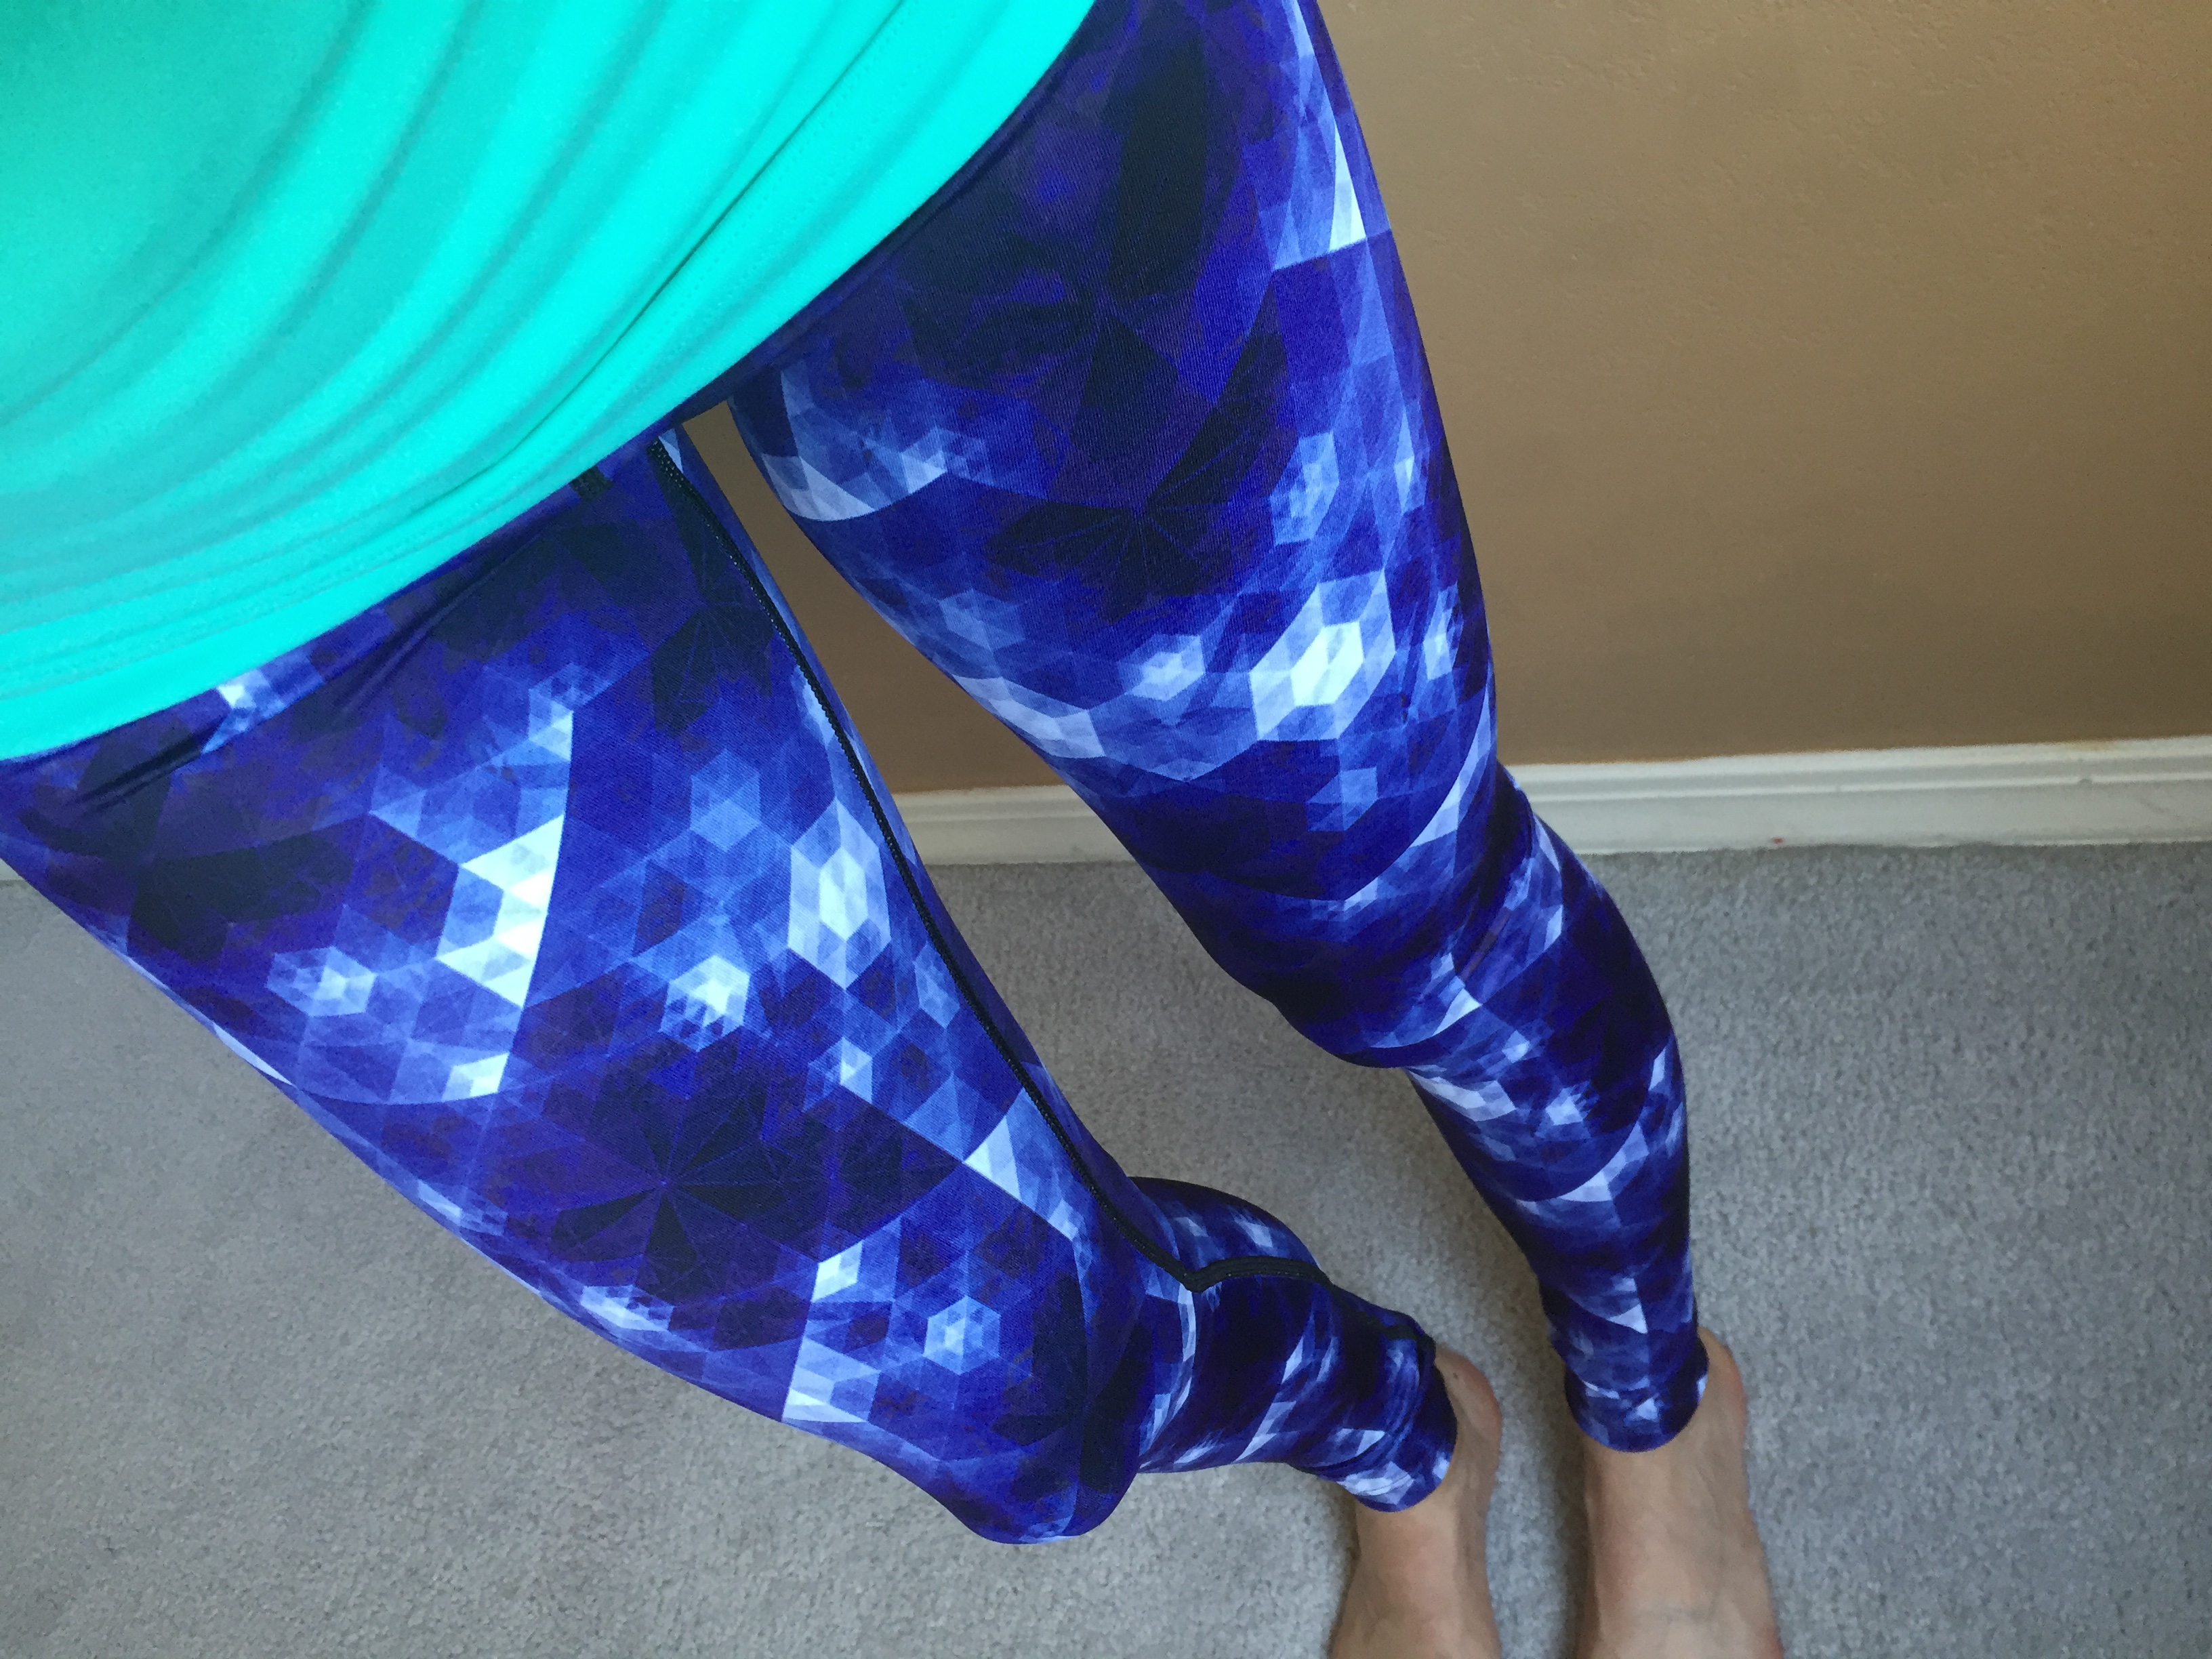 https://s7758.pcdn.co/wp-content/uploads/2015/07/Vie-Active-rockell-tight-review-blue-satellite-orchid-6.jpg